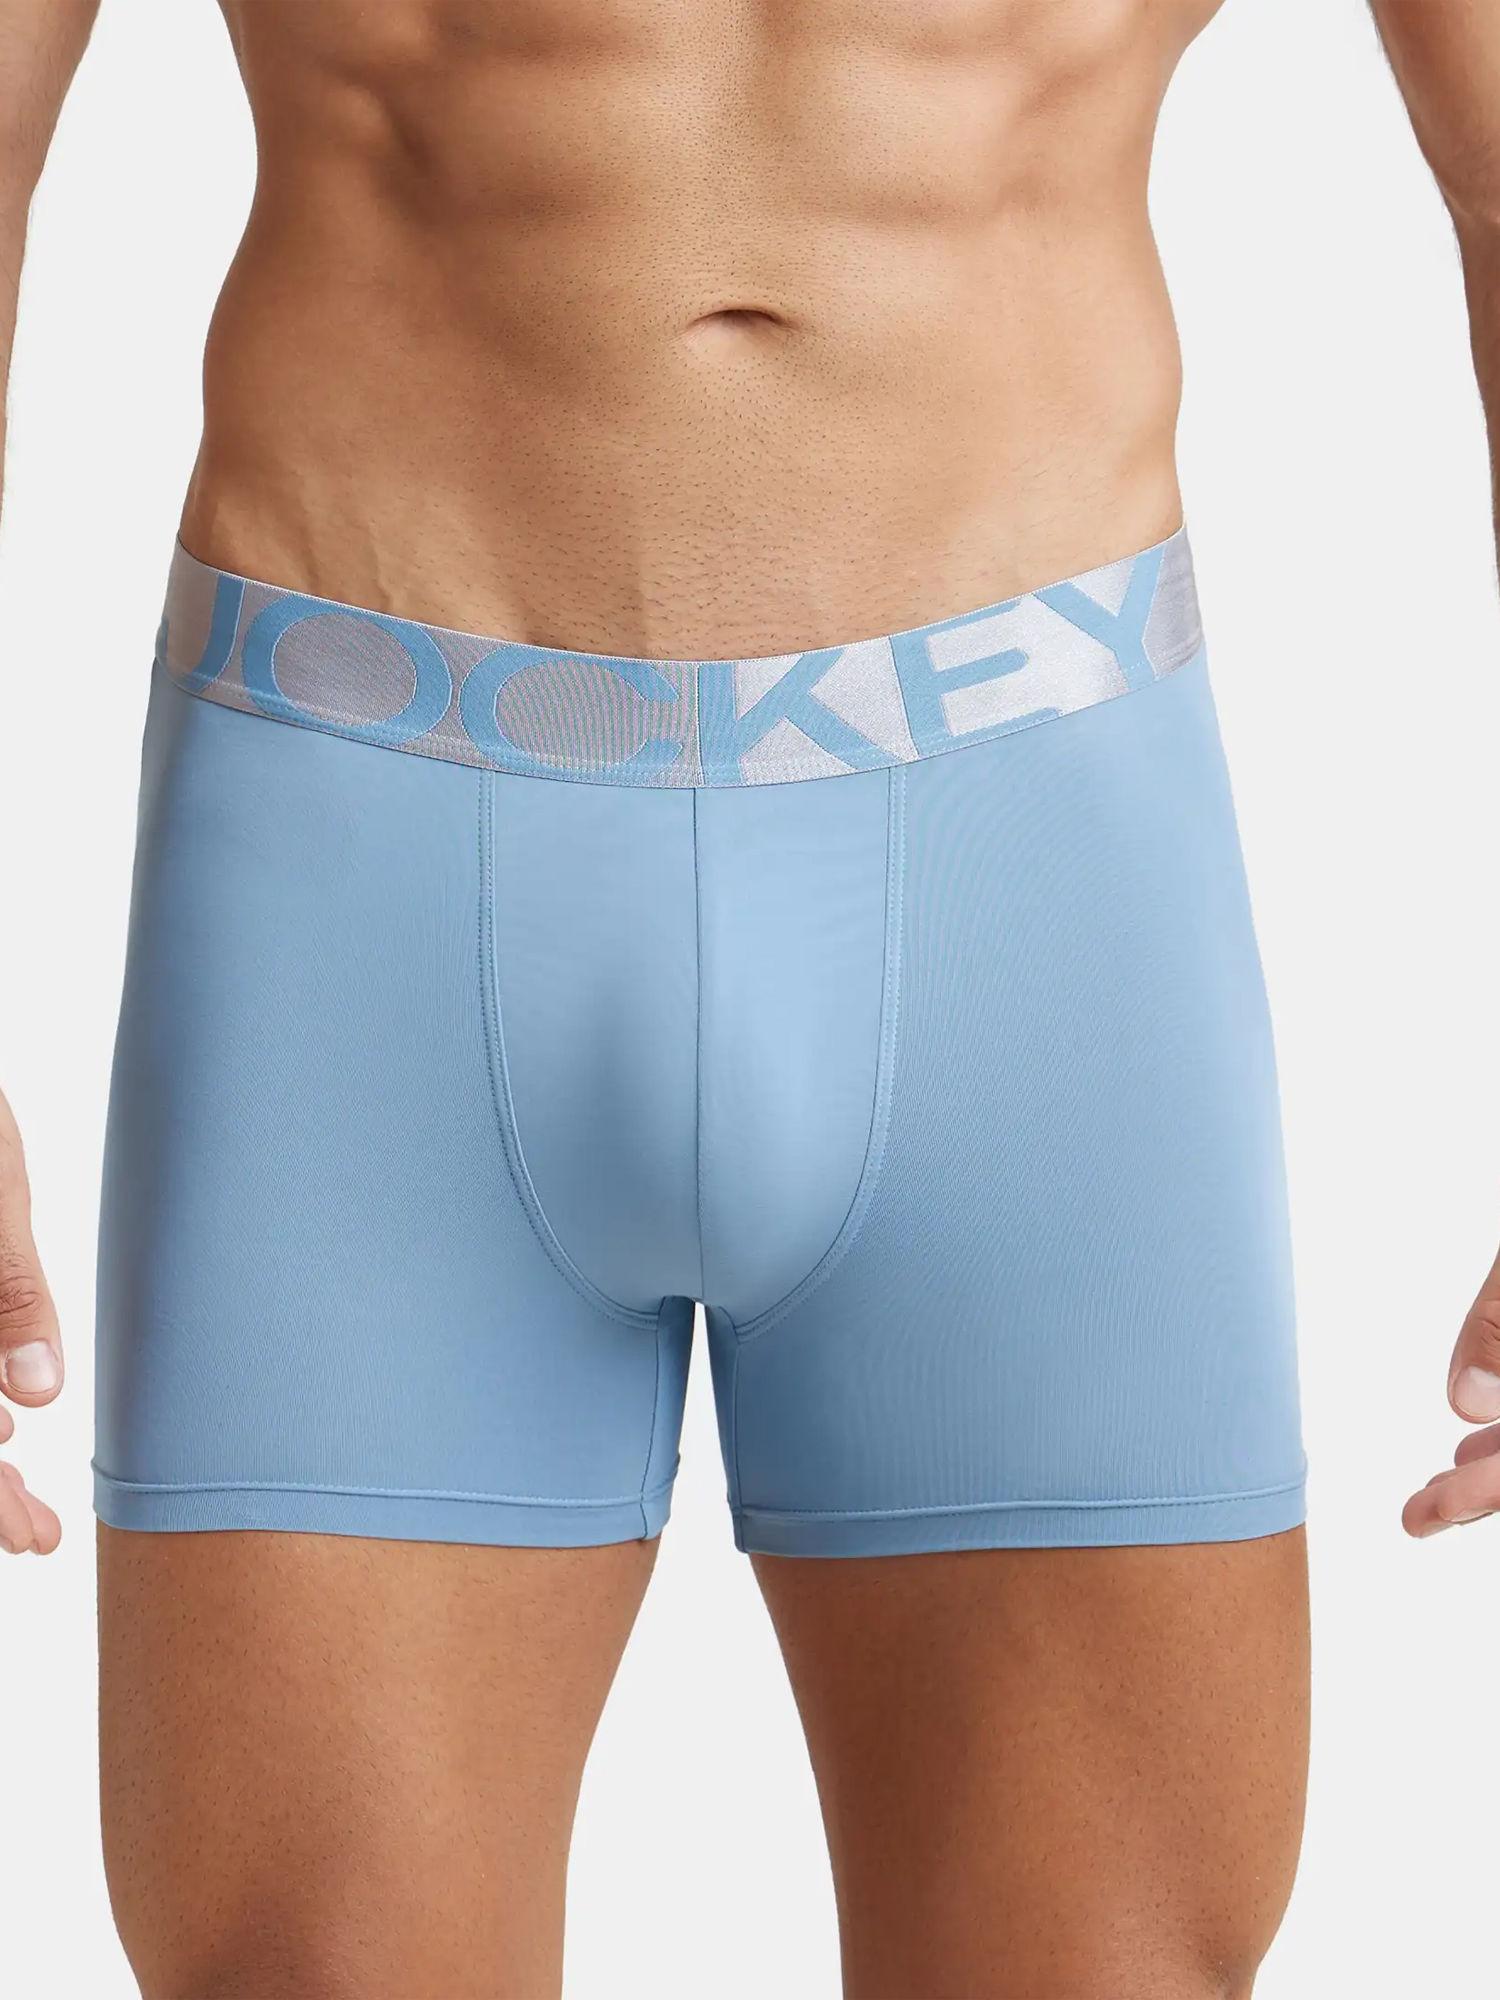 ic28 men microfiber stretch solid trunk with moisture move treatment - blue shadow